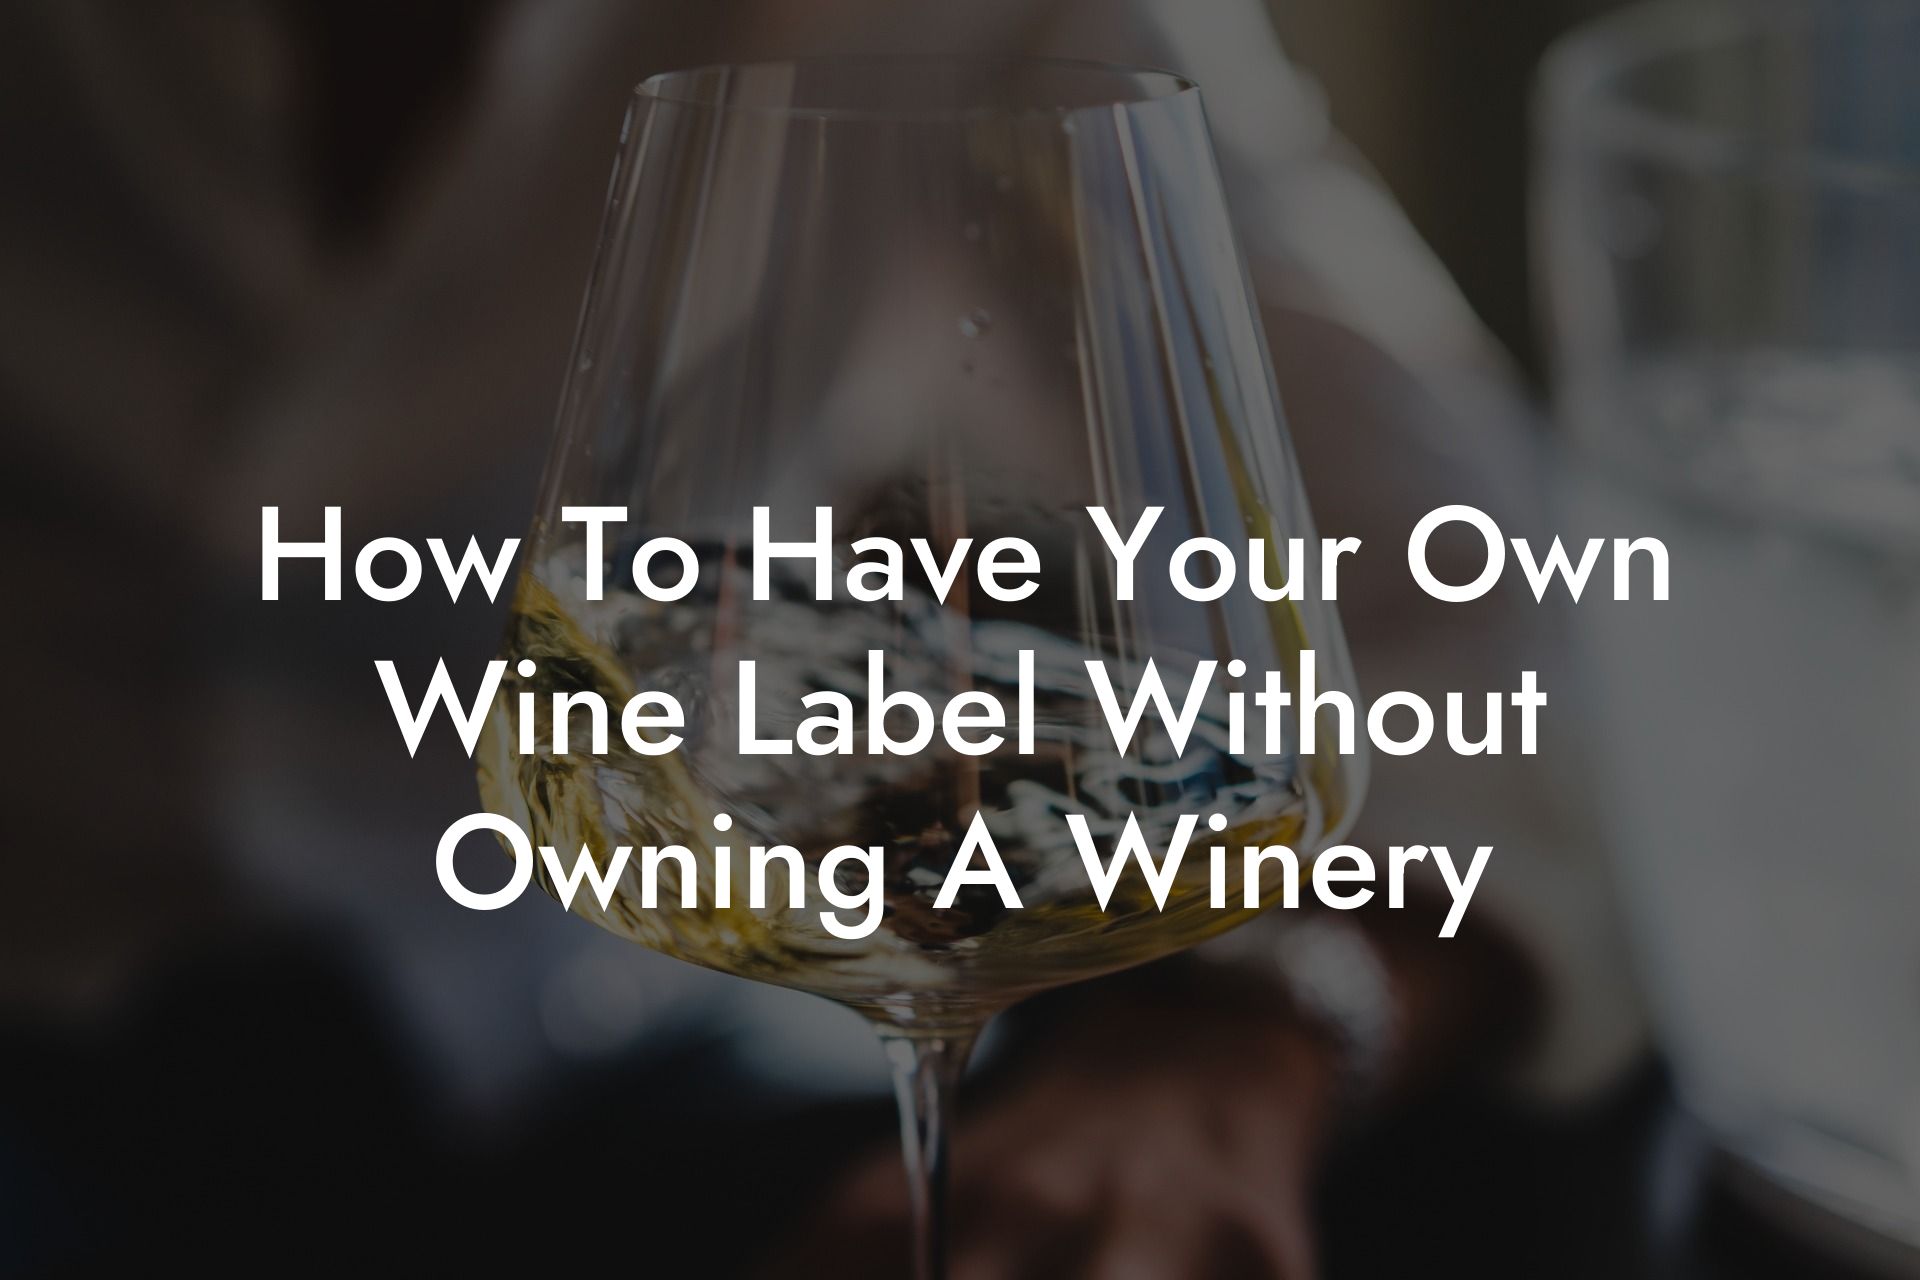 How To Have Your Own Wine Label Without Owning A Winery